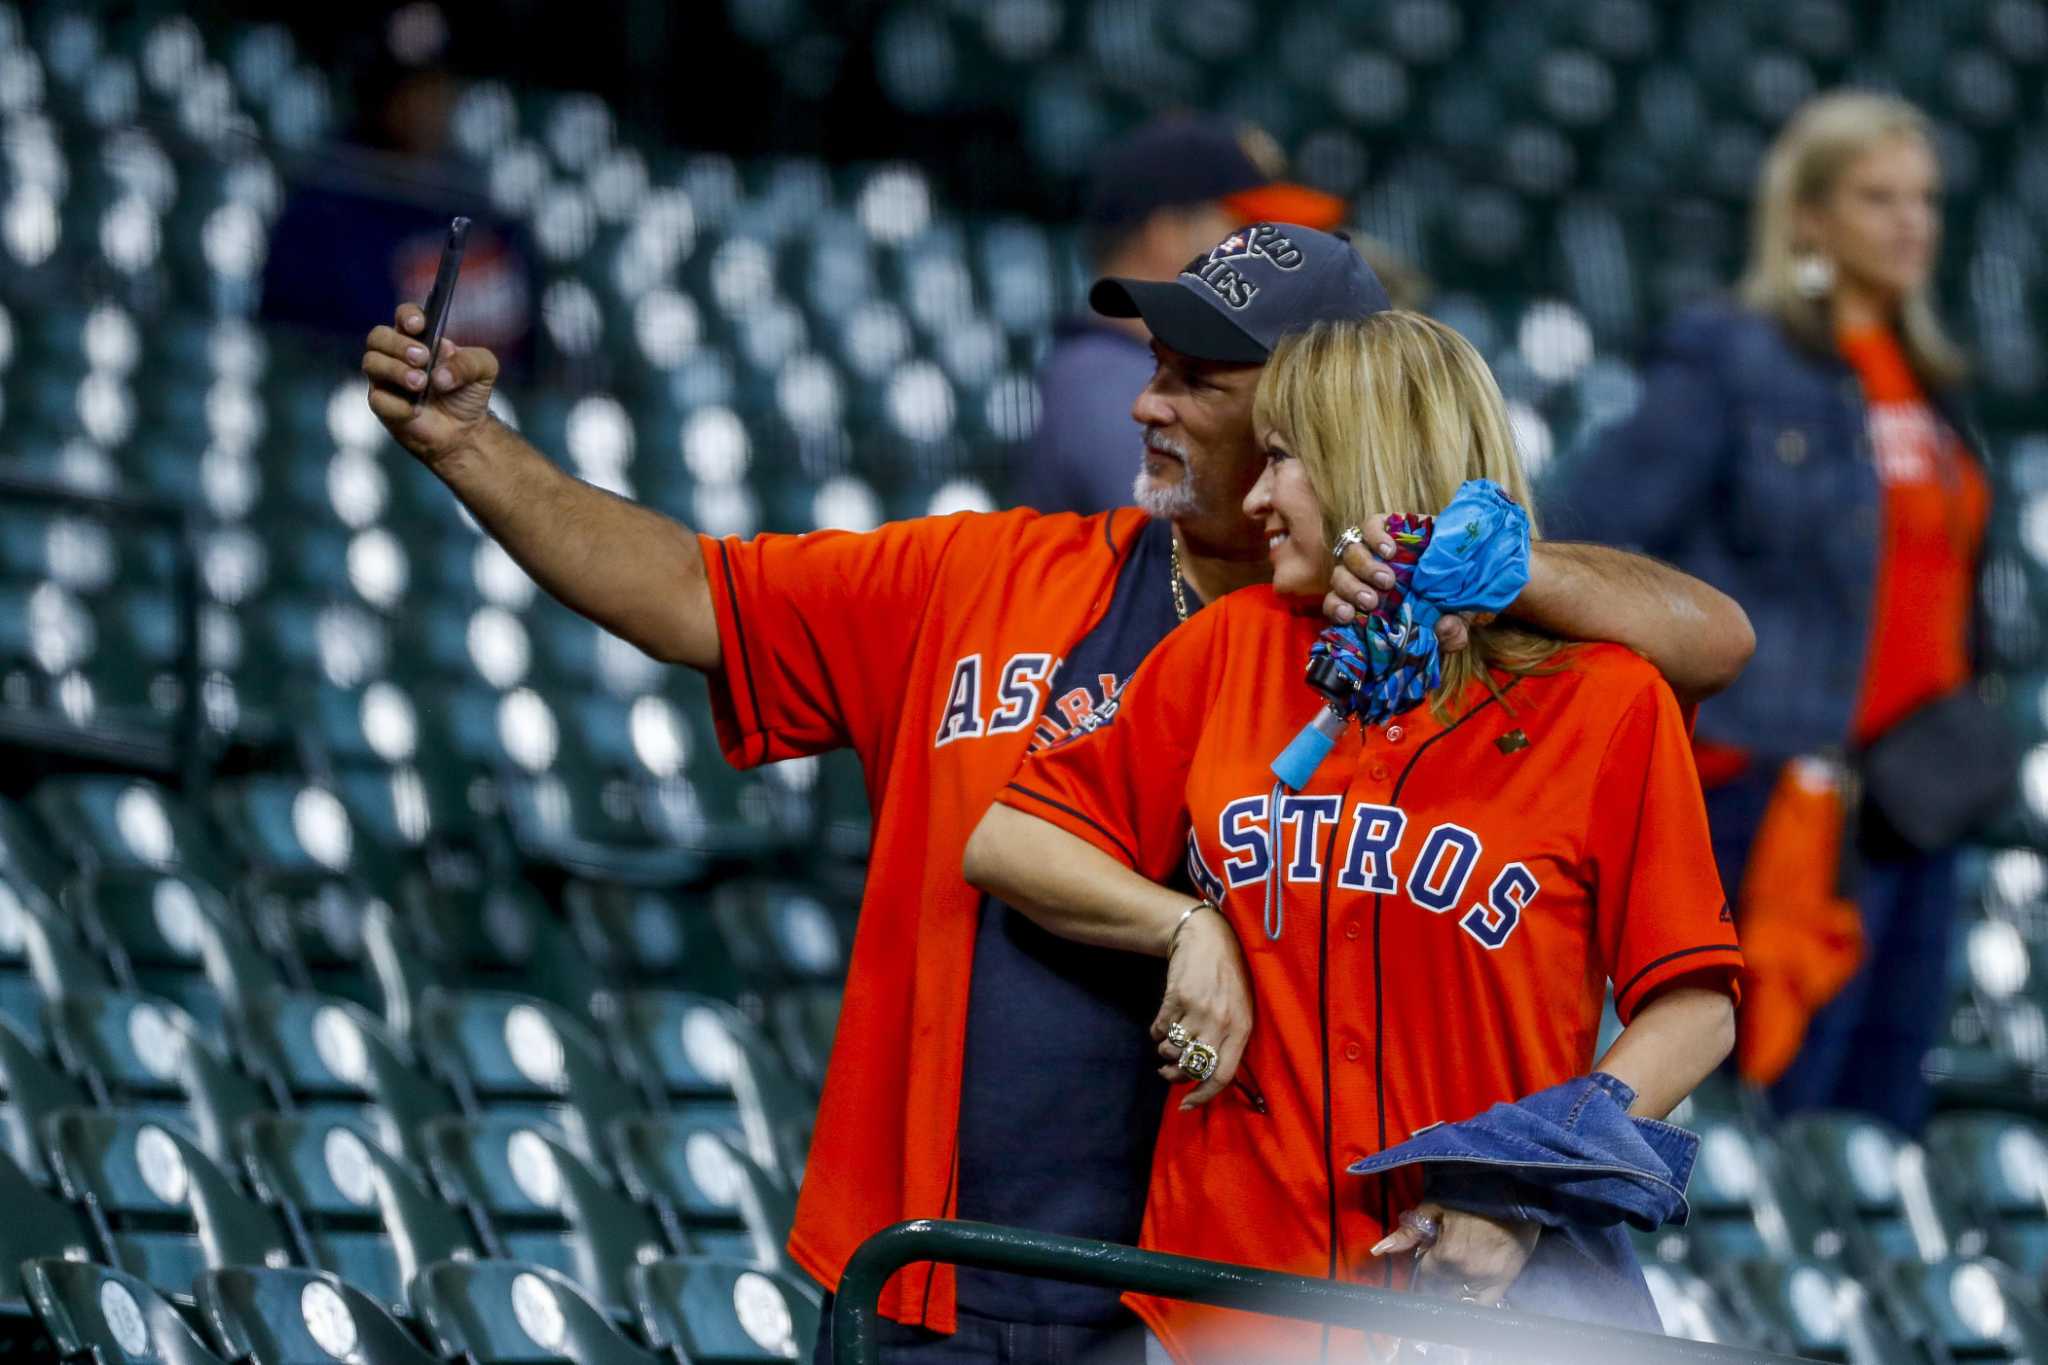 Astros Welcoming Fans Back with Stadium at 50% Capacity